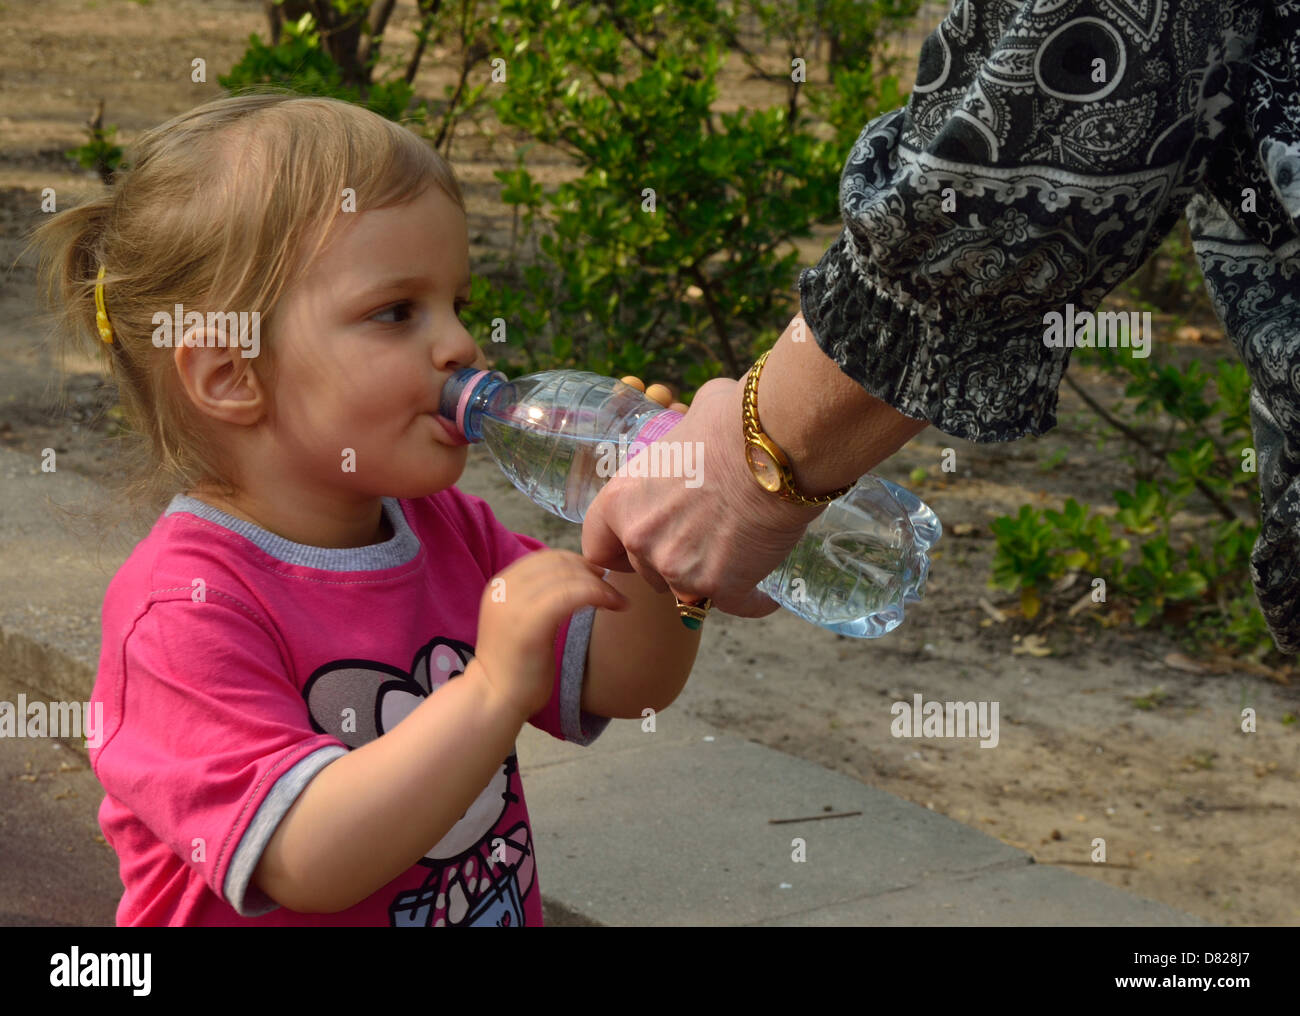 2 year old little child drinking water in a park Stock Photo